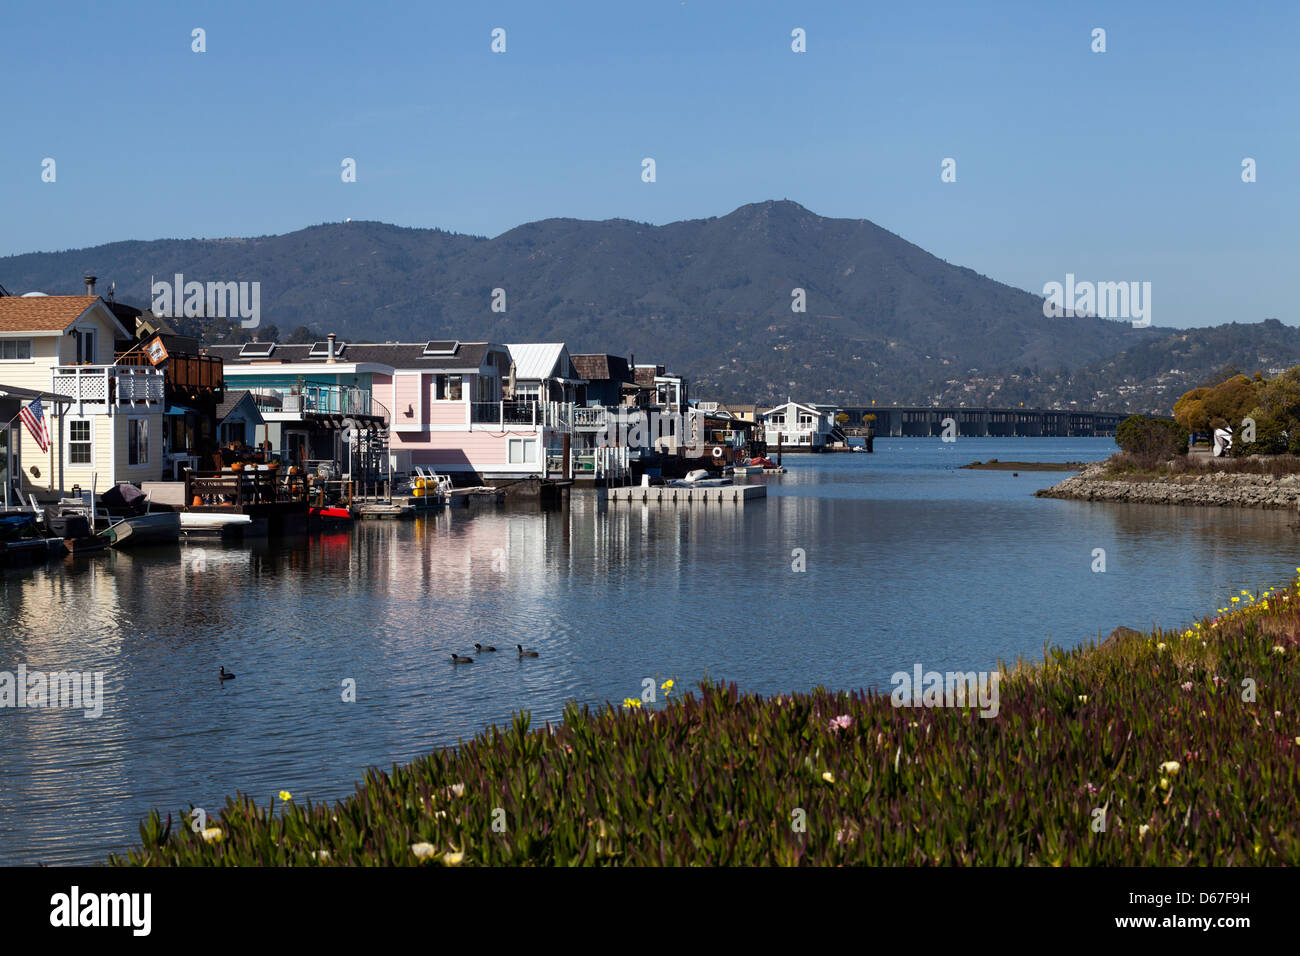 Houseboats in Sausalito with Mt. Tamalpais in the background, California, USA, North America Stock Photo